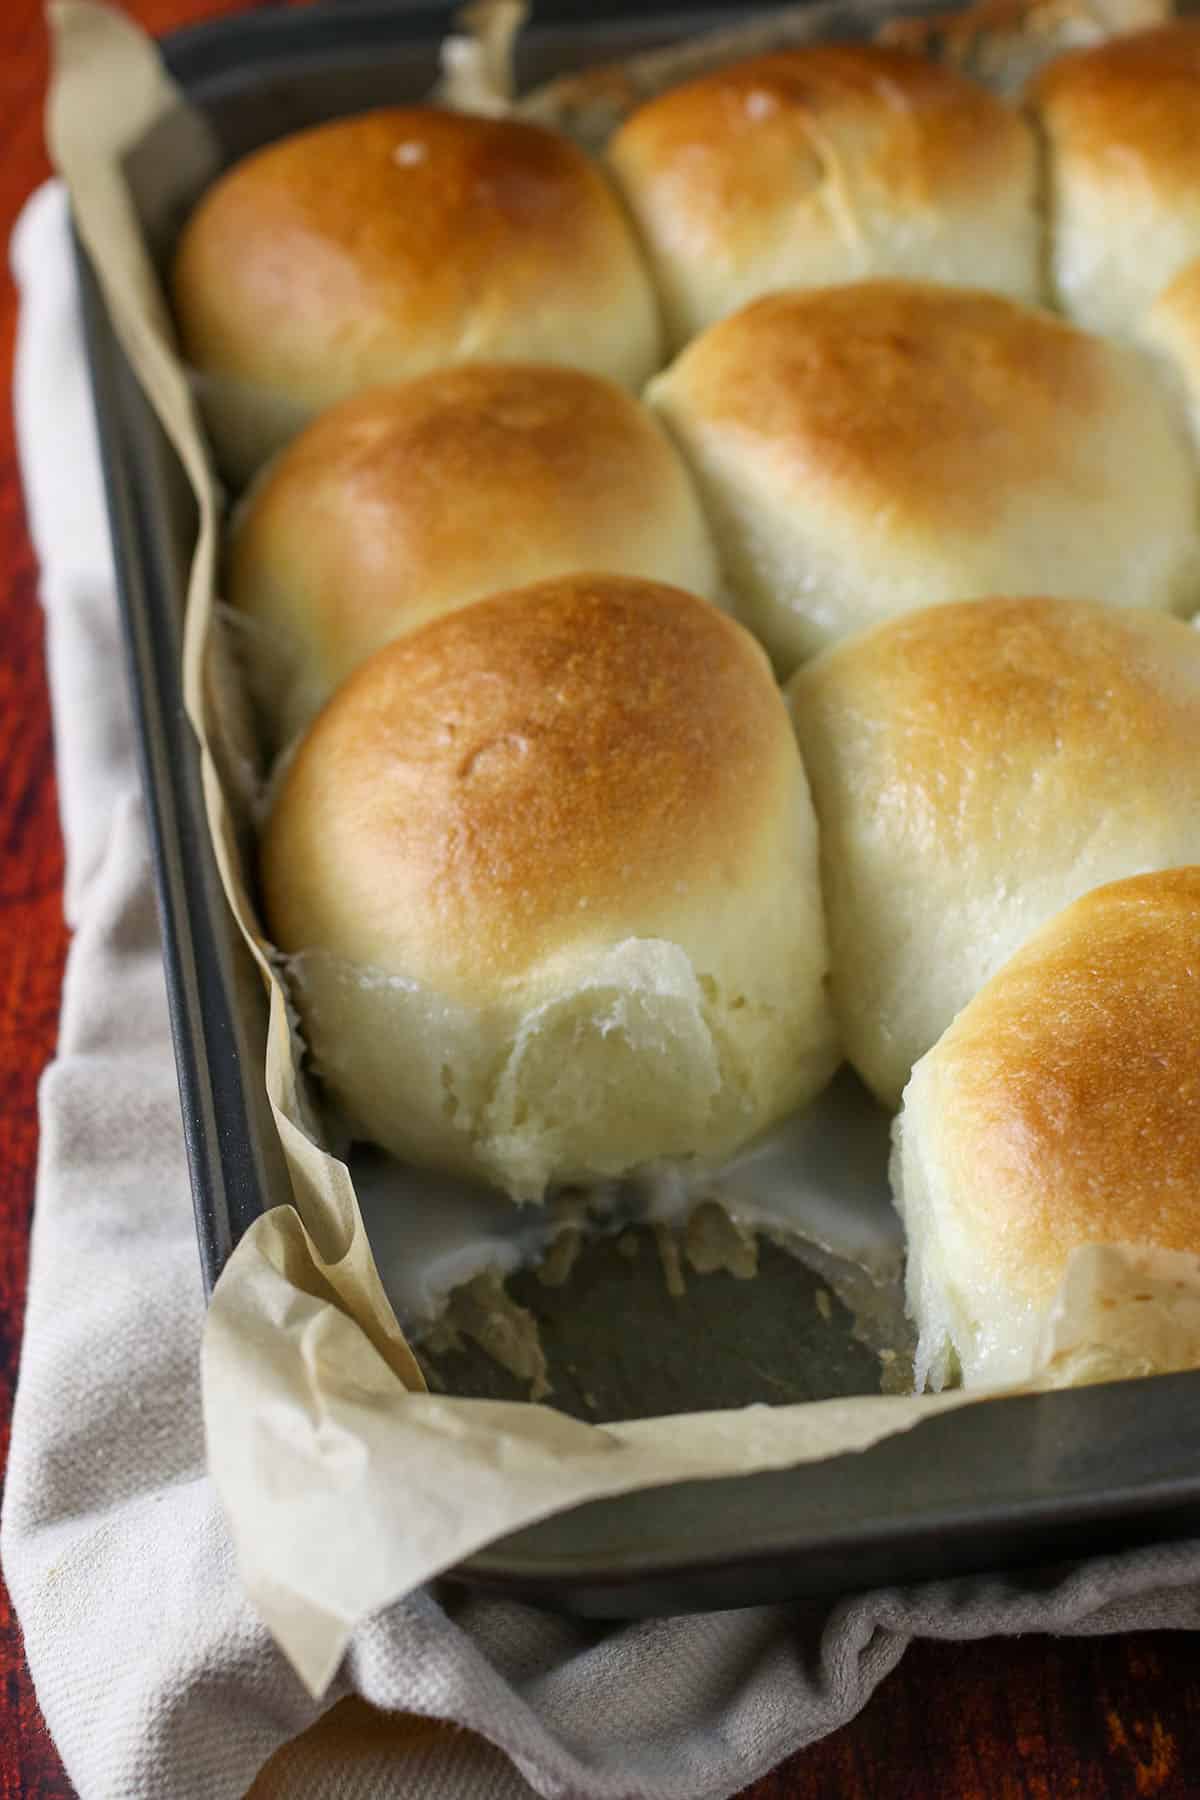 Pani Popo or Coconut bread on a baking pan.